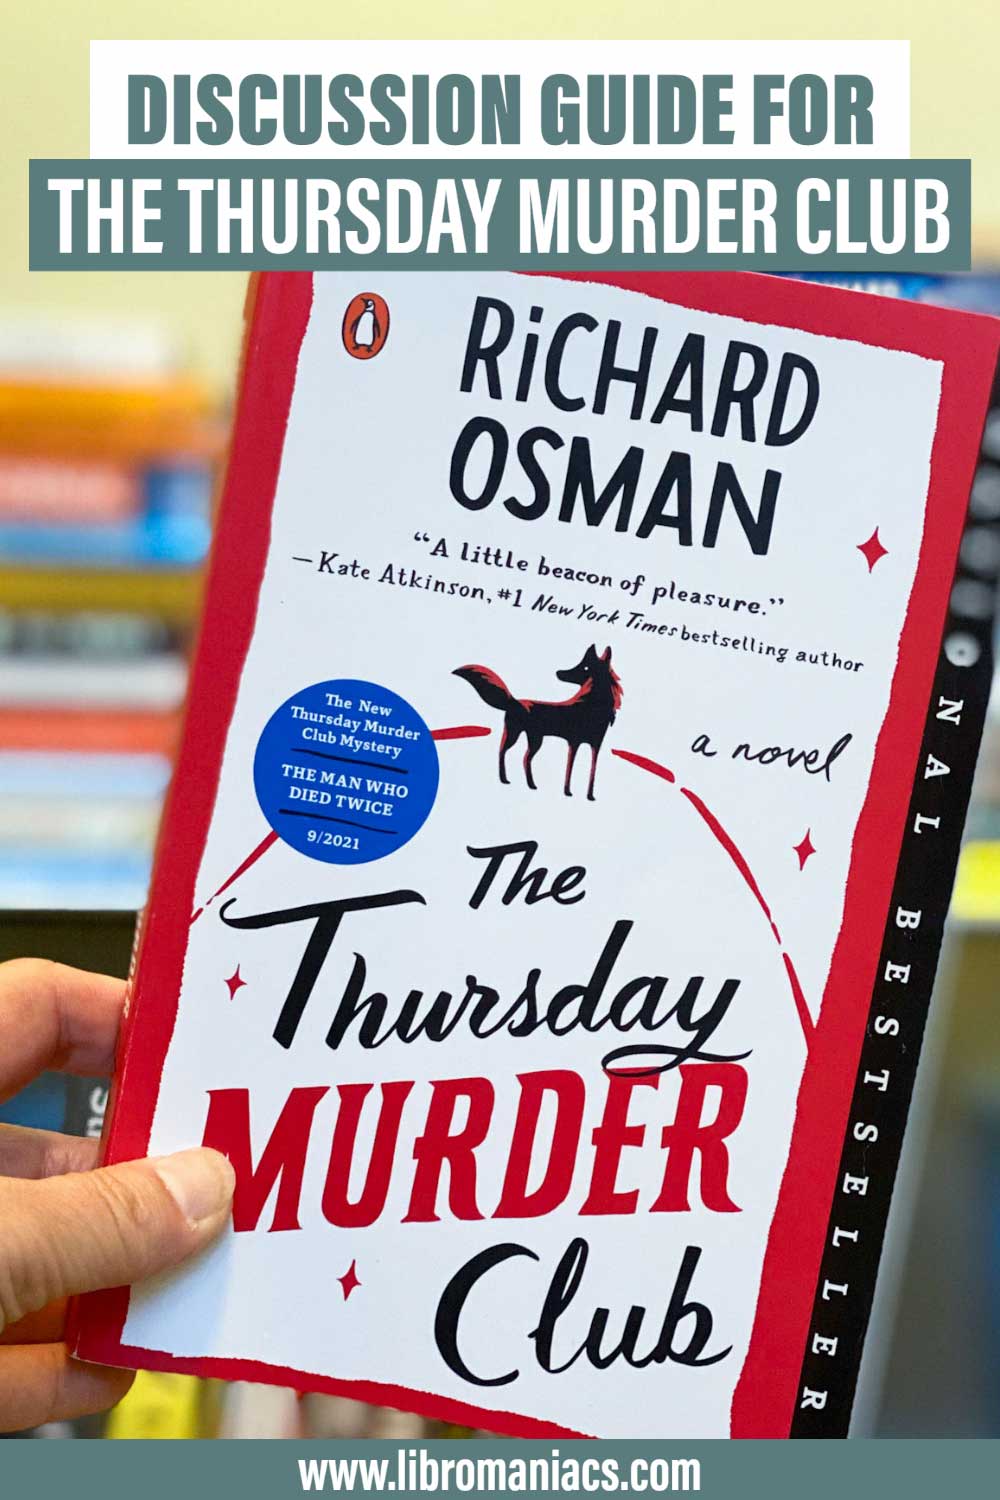 The Thursday Murder Club discussion guide